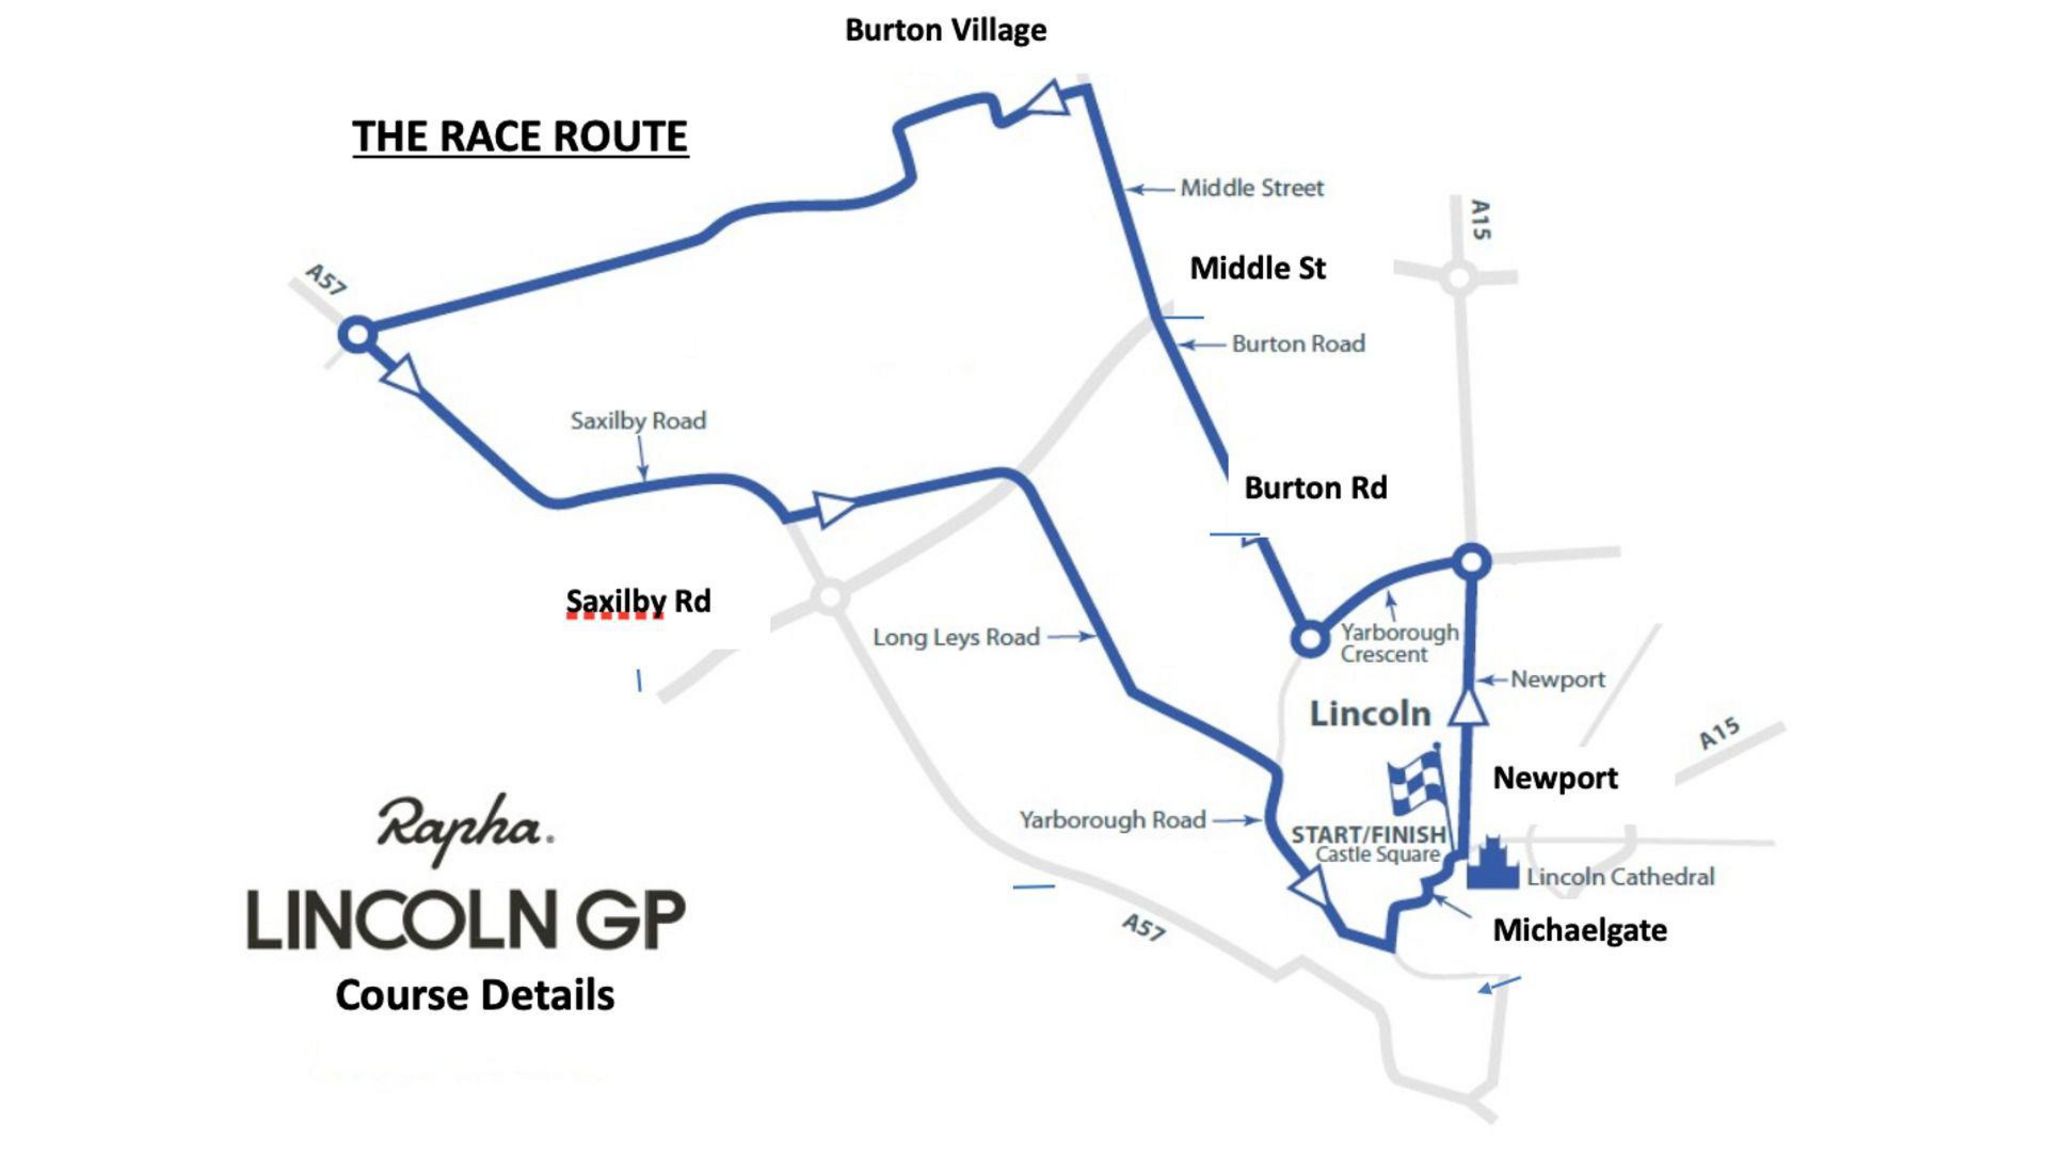 The Lincoln Grand Prix route for the male and female professional races